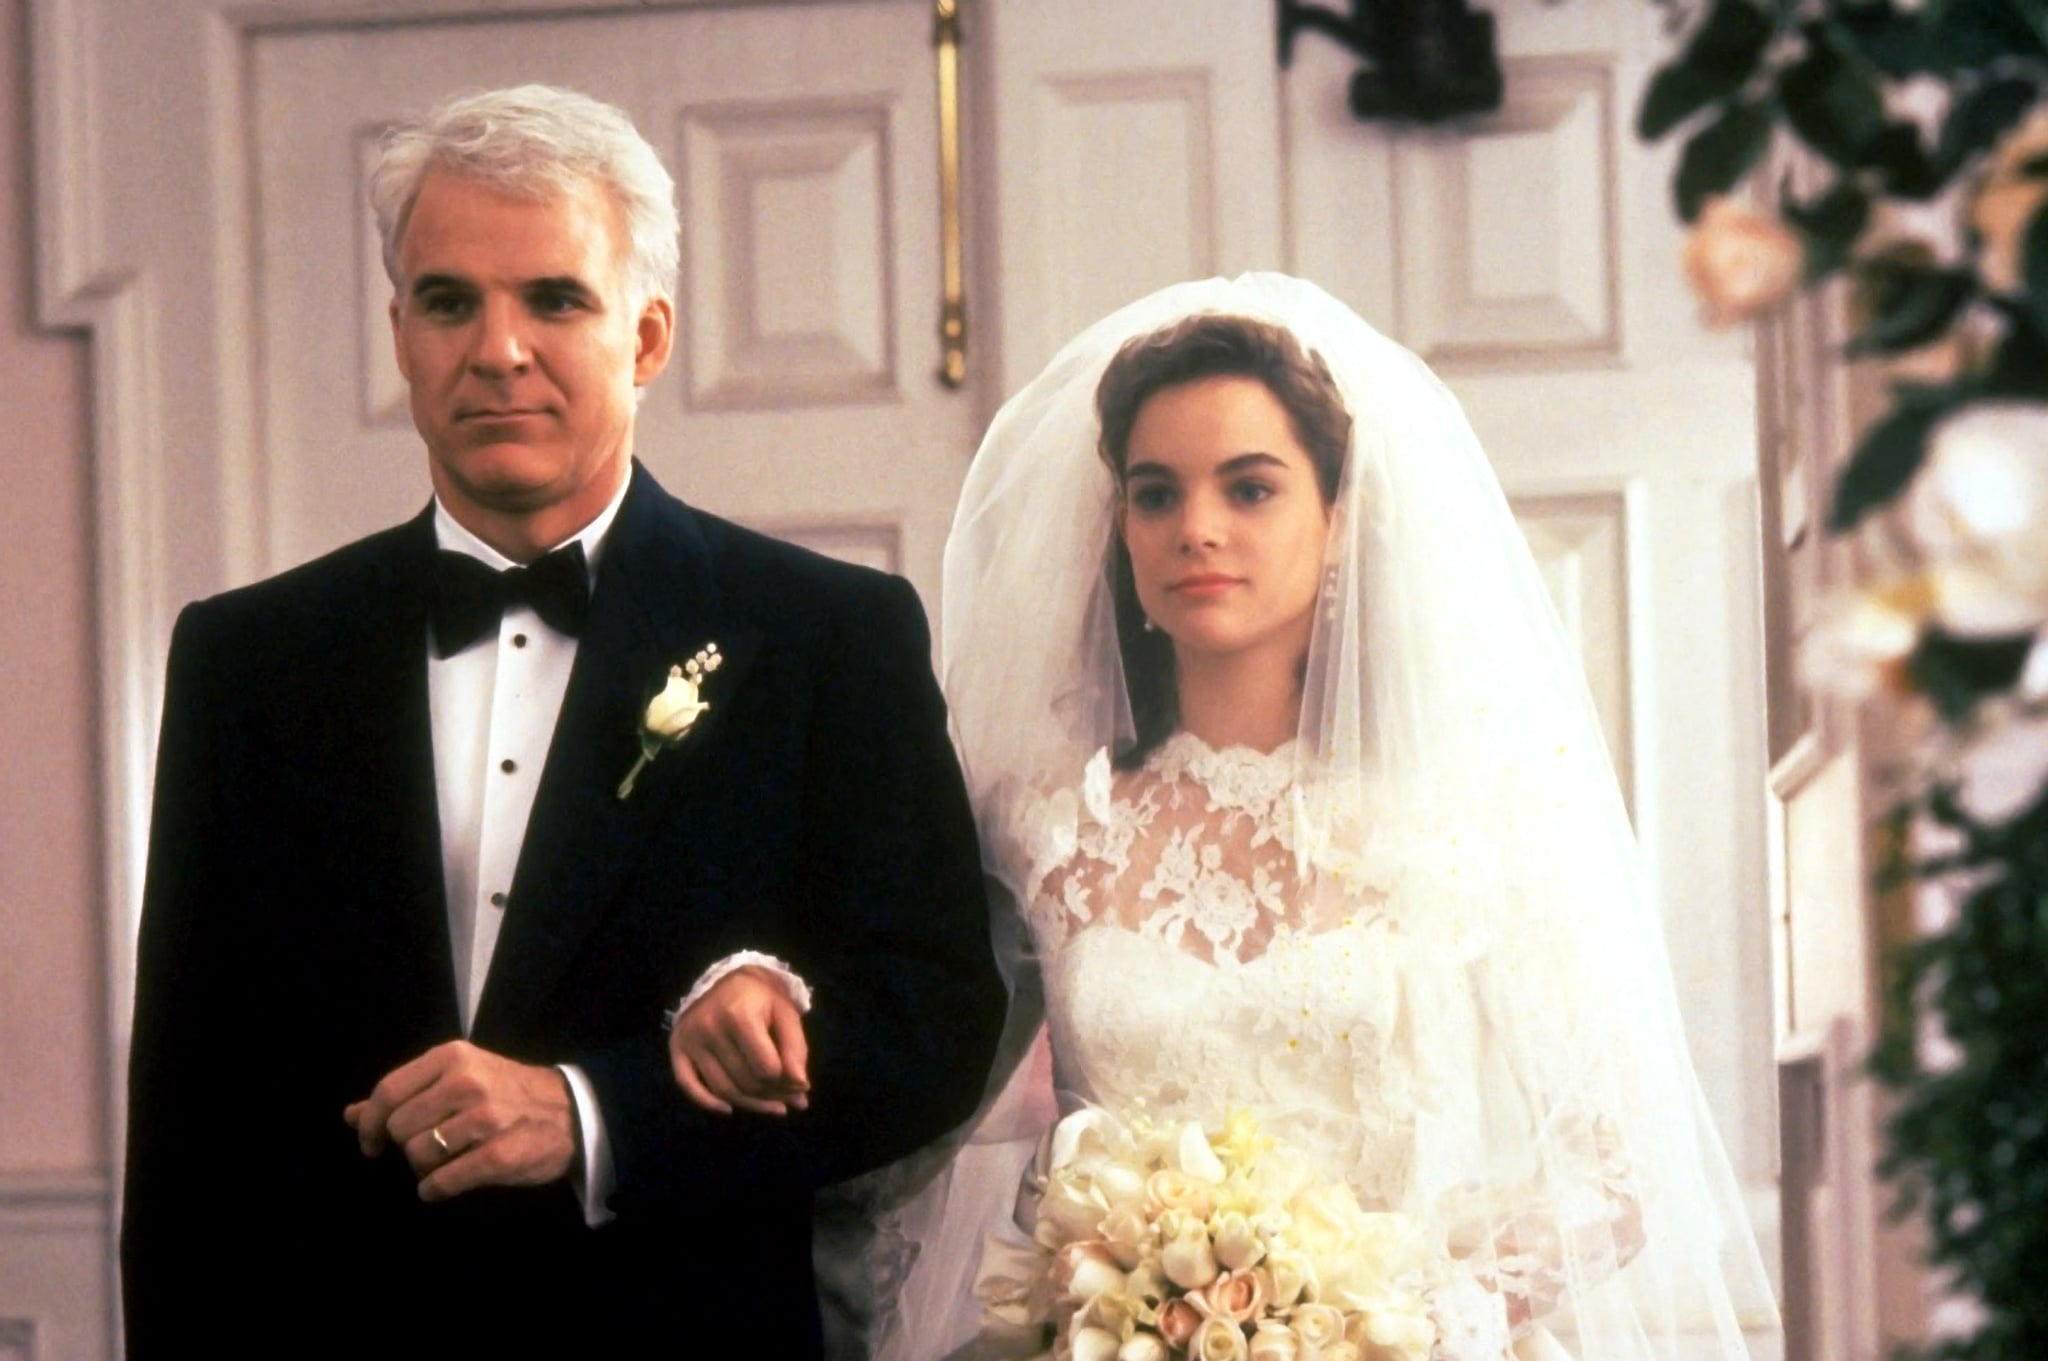 FATHER OF THE BRIDE, from left: Steve Martin, Kimberly Williams, 1991, Buena Vista Pictures/courtesy Everett Collection